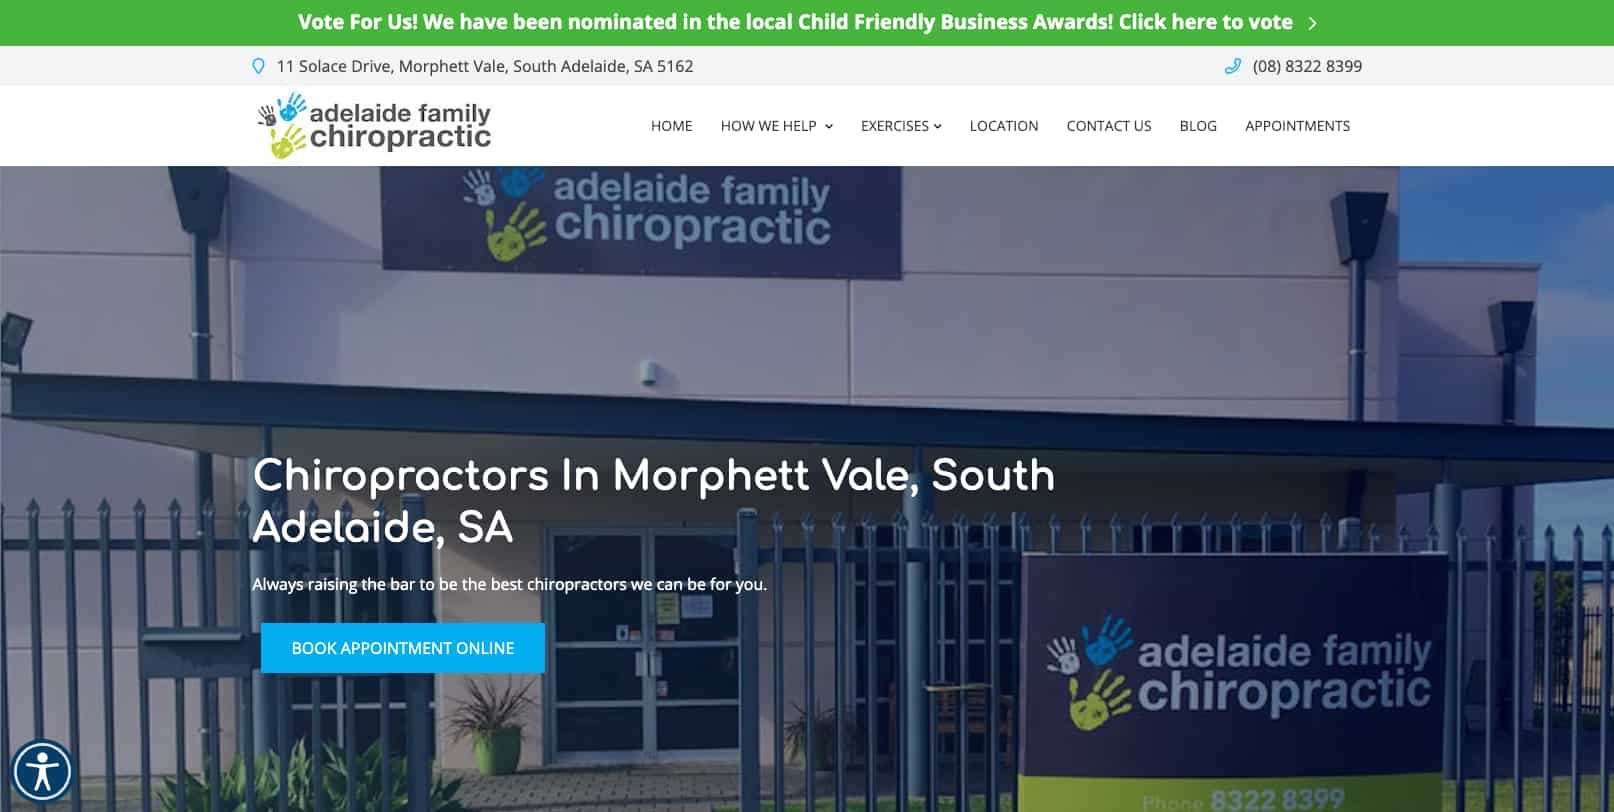 Adelaide Family Chiropractic